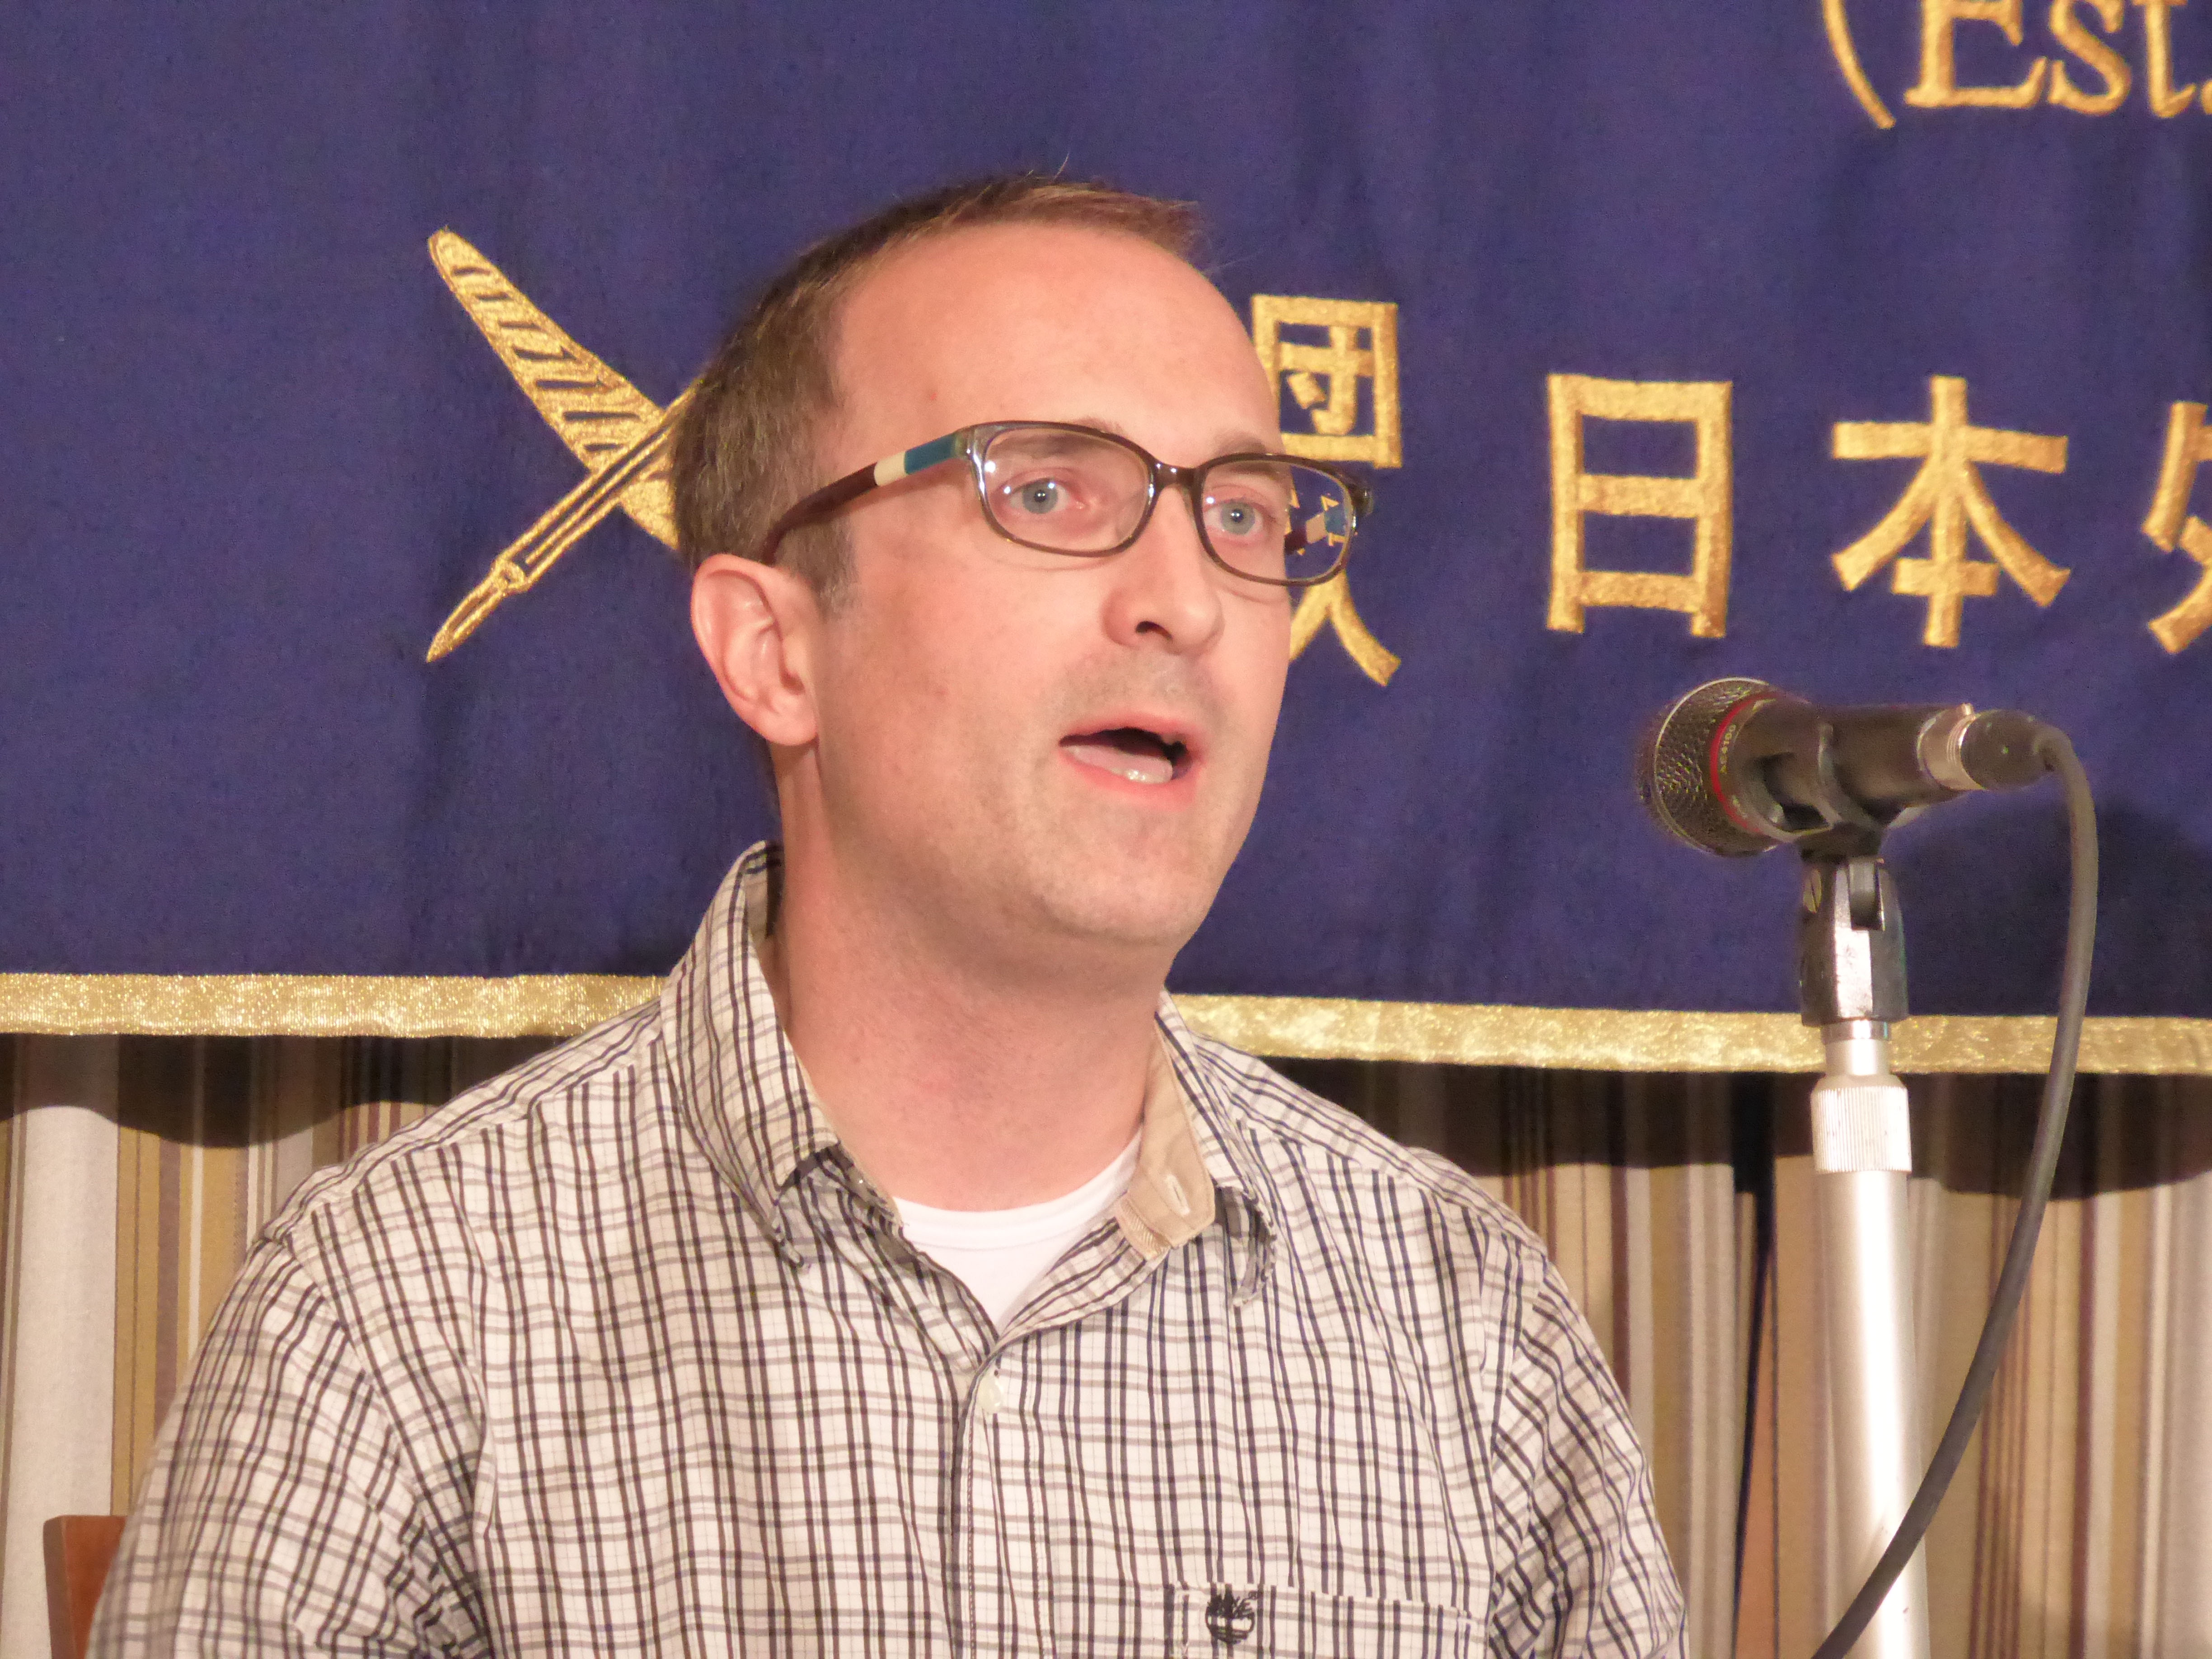 Jon Mitchell speaks about his research on military defoliants in Okinawa at a press conference Thursday in Tokyo. | SHUSUKE MURAI